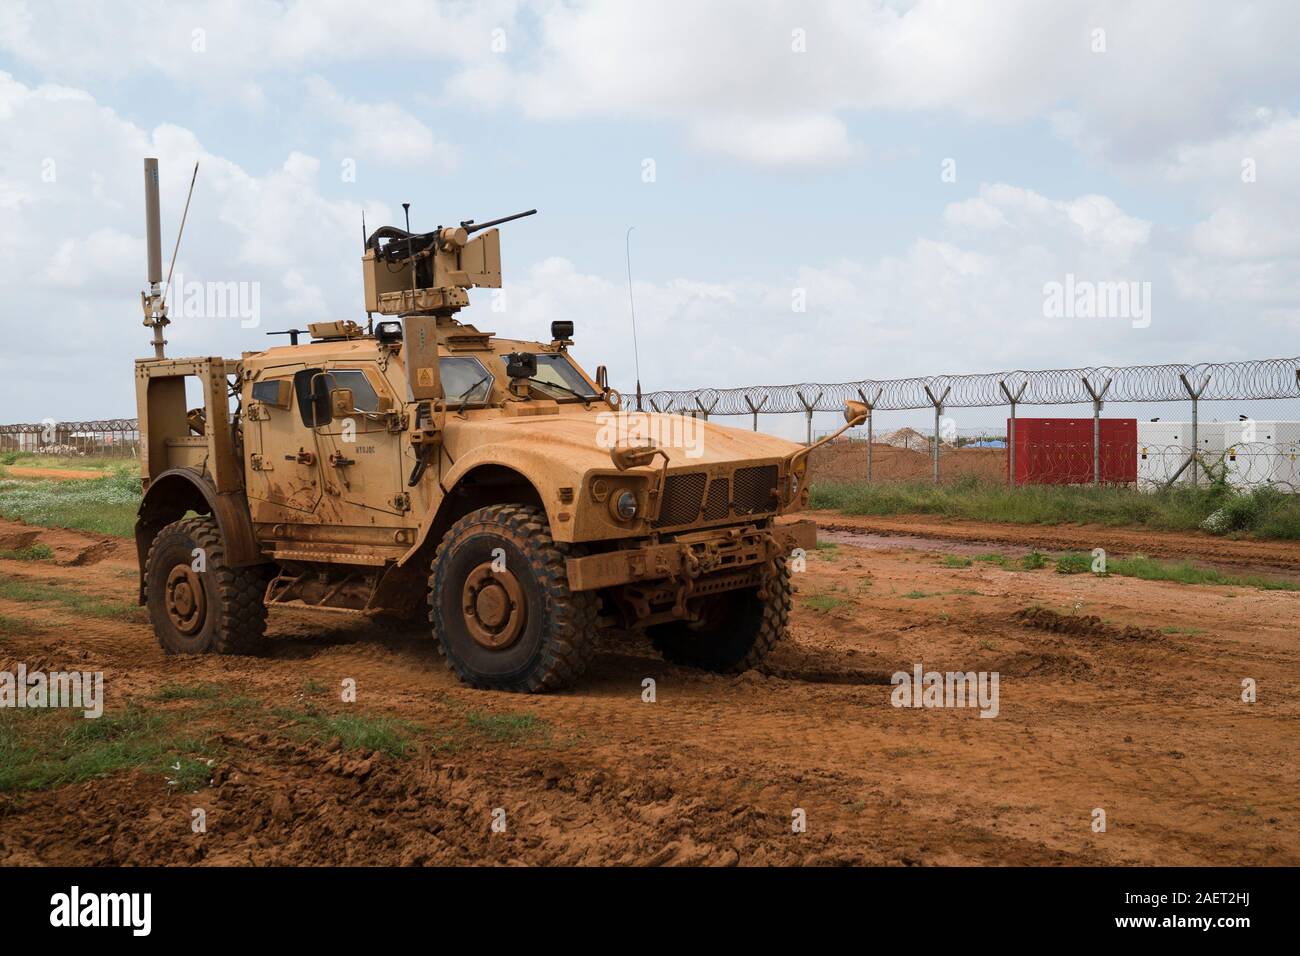 A Military All-Terrain Vehicle, assigned to Task Force Guardian, 41st Infantry Brigade Combat Team (IBCT), 1-186th Infantry Battalion, Oregon National Guard, conducts a security patrol in Somalia, on December 3, 2019. The 41st IBCT provides base security and force protection for Combined Joint Task Force-Horn of Africa personnel and partner U.S. forces deployed in Somalia. (U.S. Air Force photo by Tech. Sgt. Nick Kibbey) Stock Photo